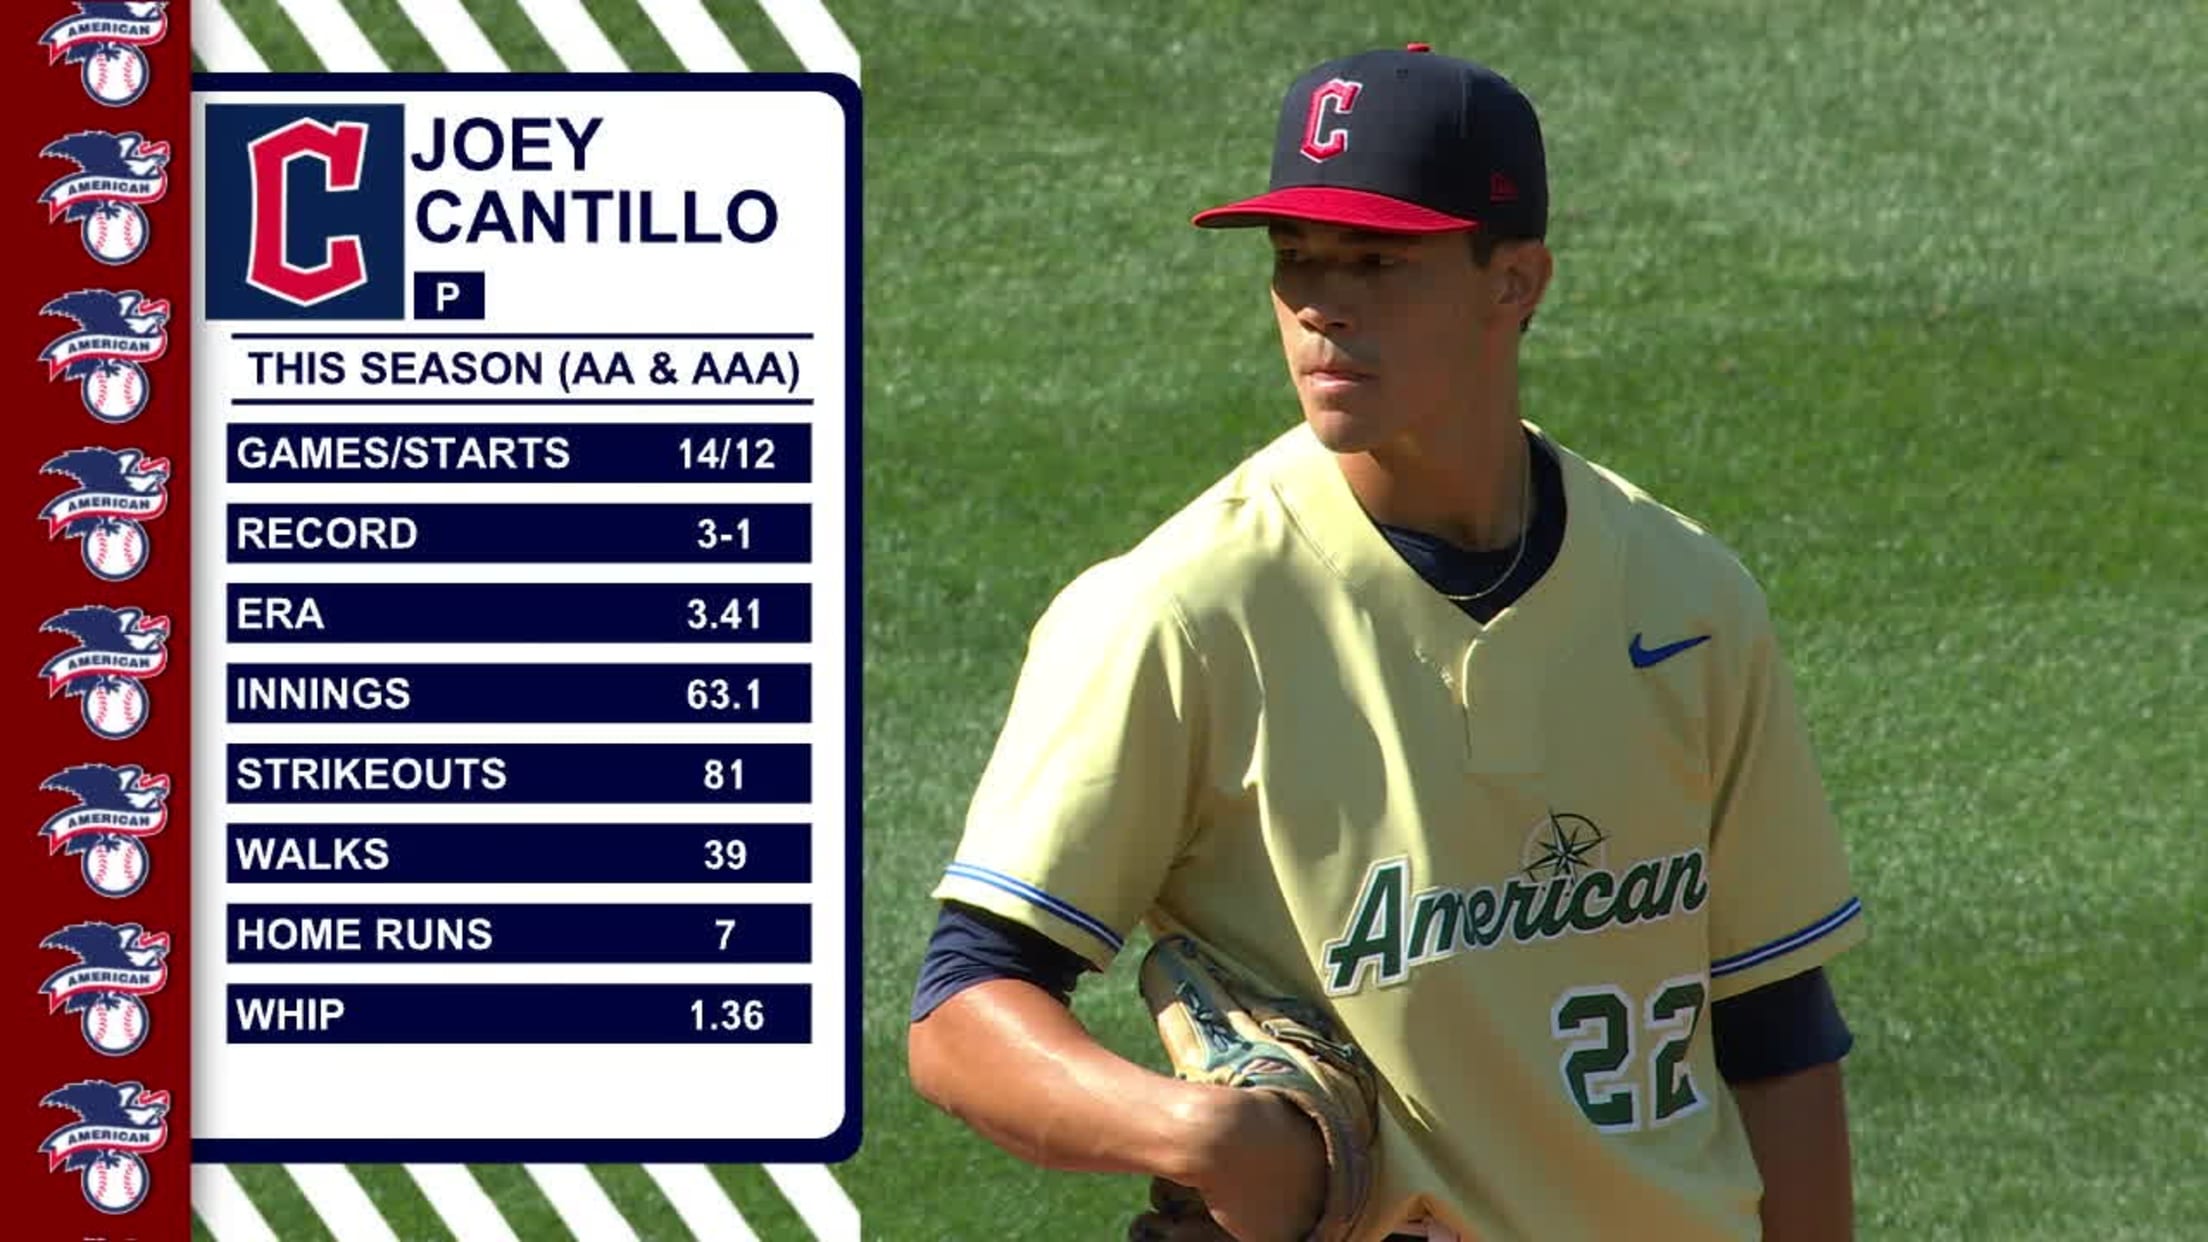 Joey Cantillo's two strikeouts